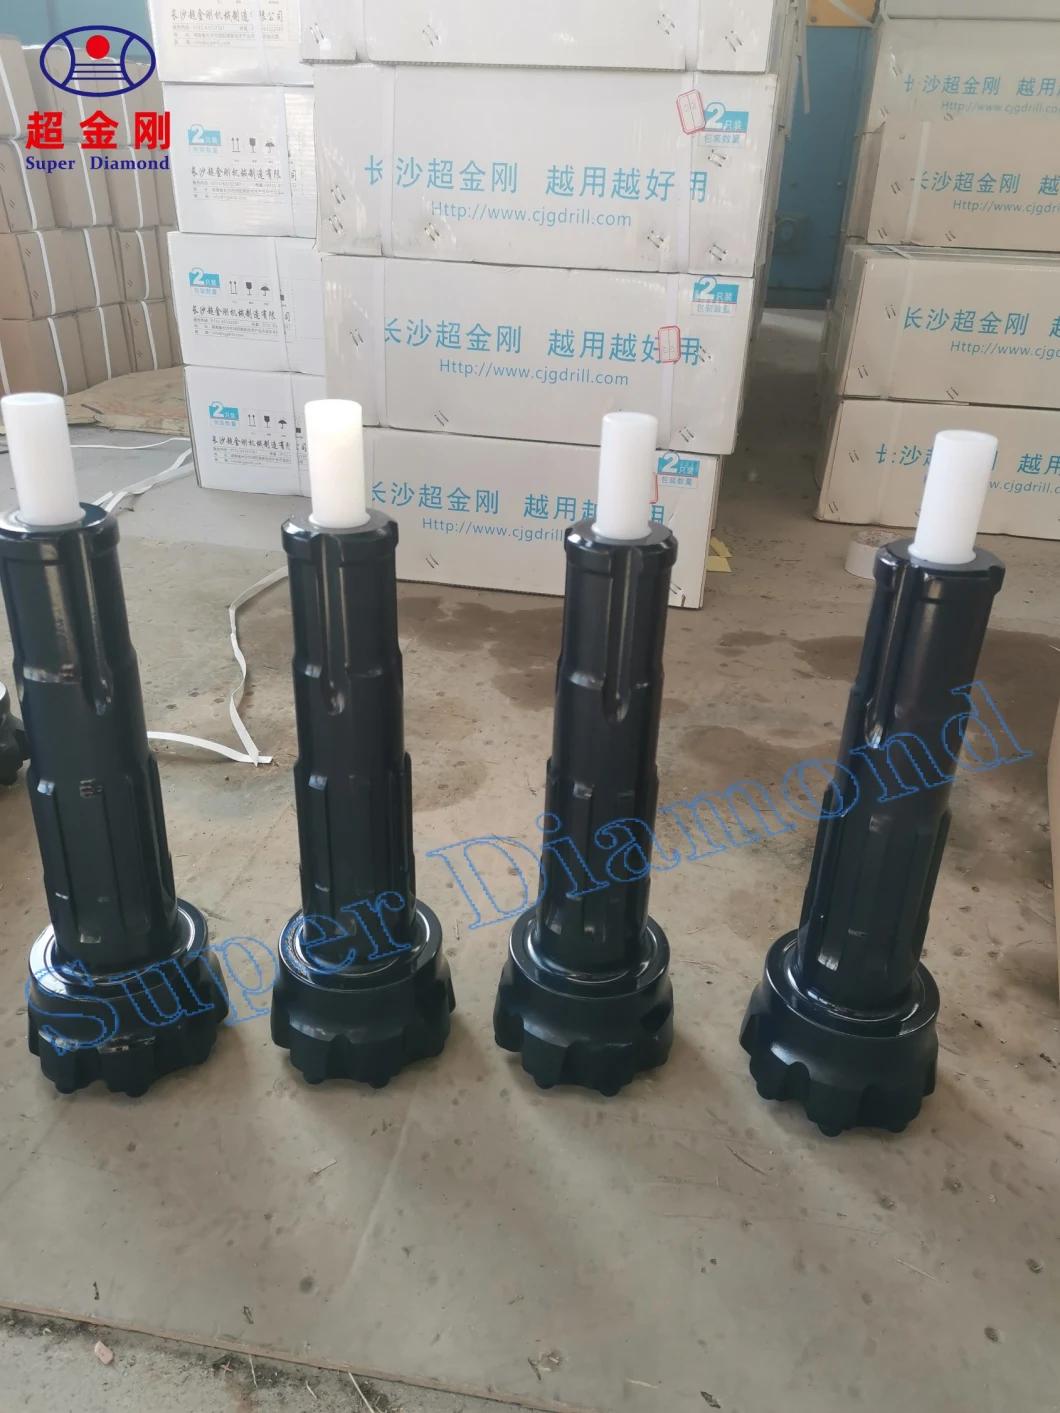 China Factory High Quality M50 Rock Drill Bit for 5inch DTH Hammer